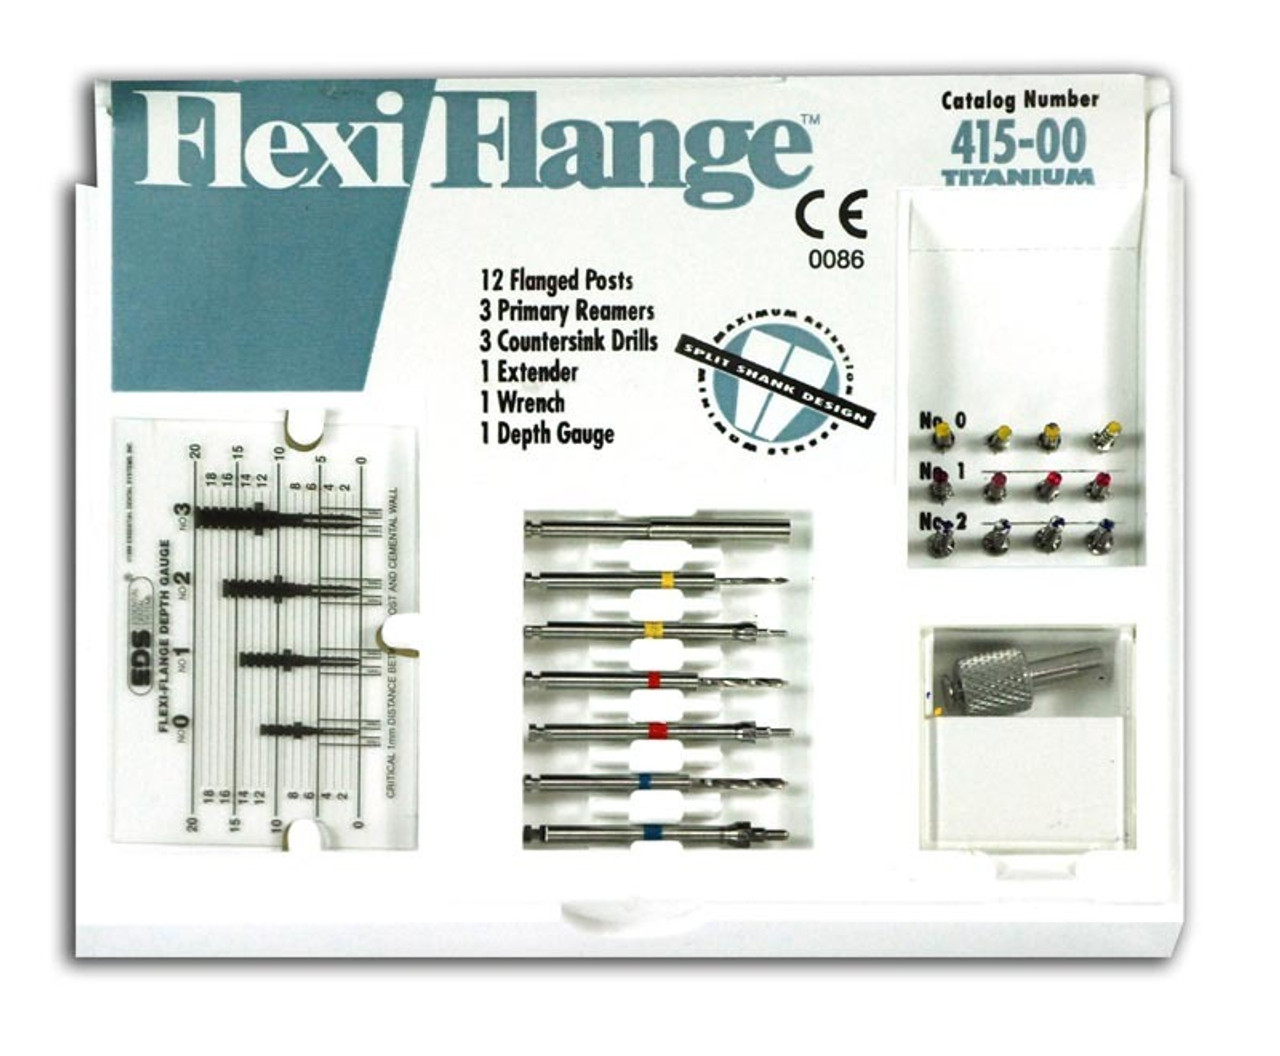 Flexi-Flange Titanium Introductory Kit-Yellow, Red, Blue Sizes 0, 1, 2